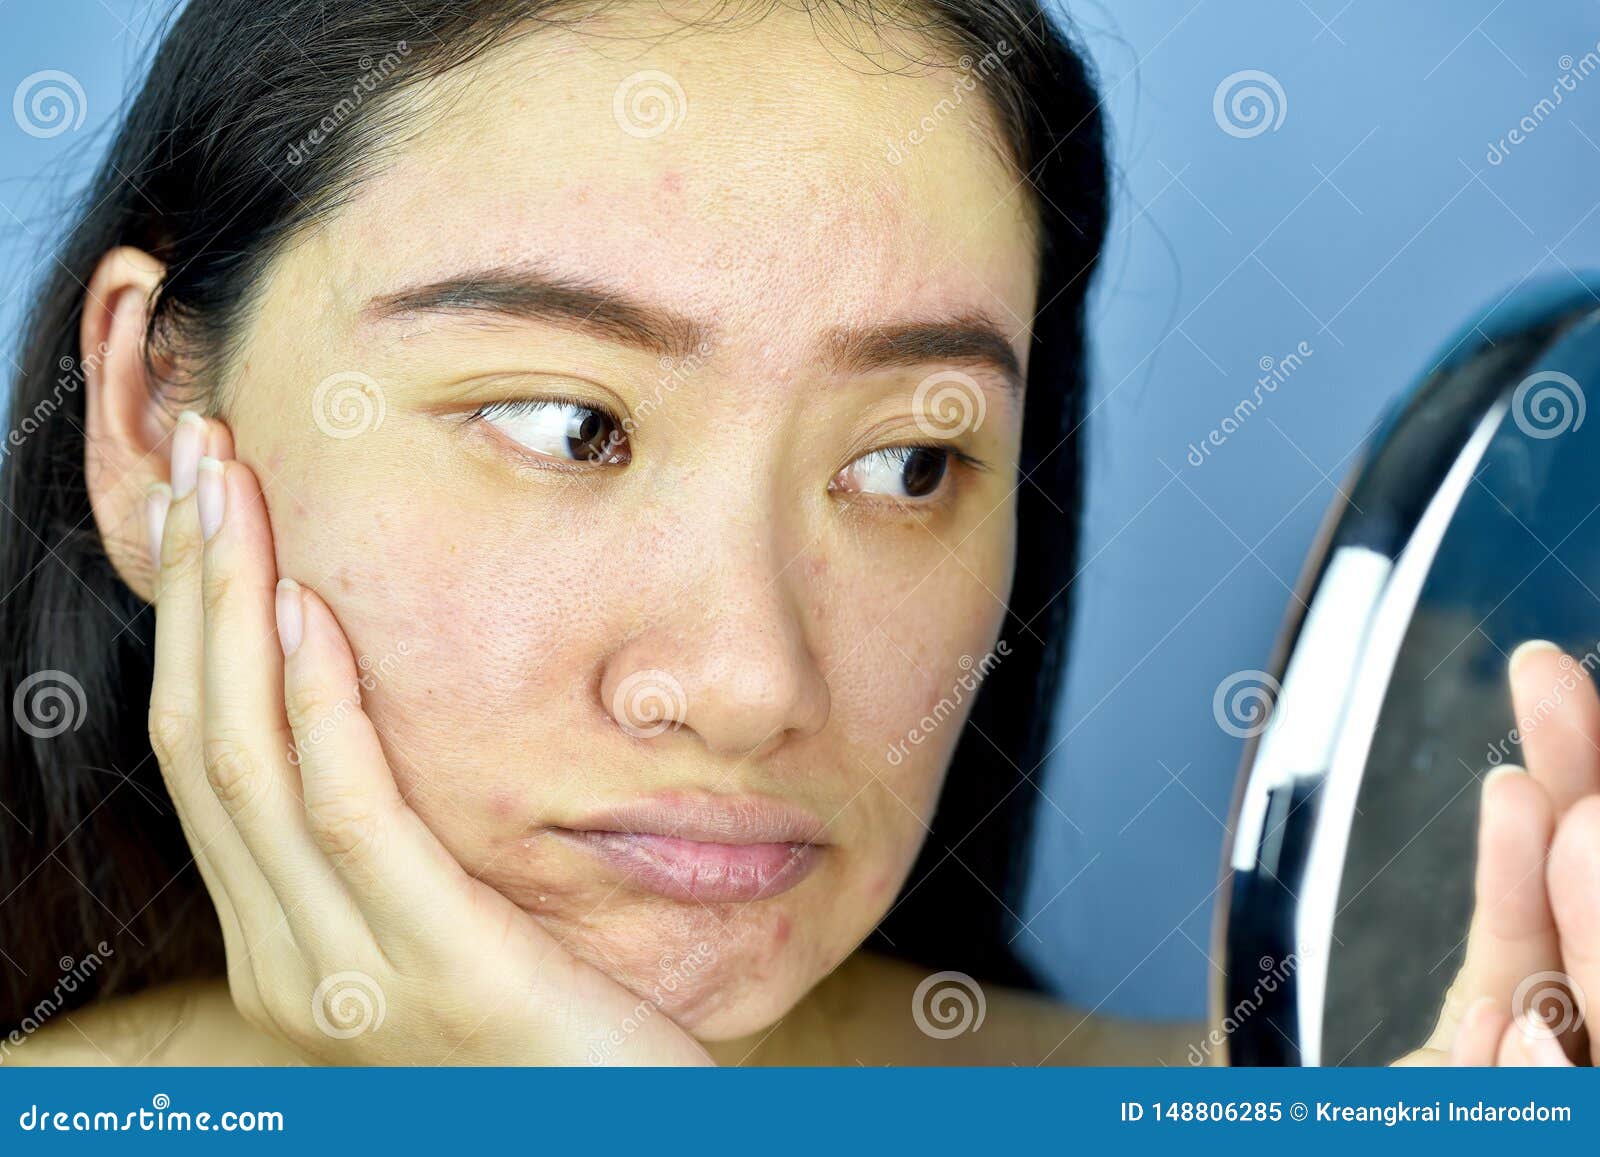 asian woman looking at herself in the mirror, female feeling annoy about her reflection appearance show the aging facial skin sign